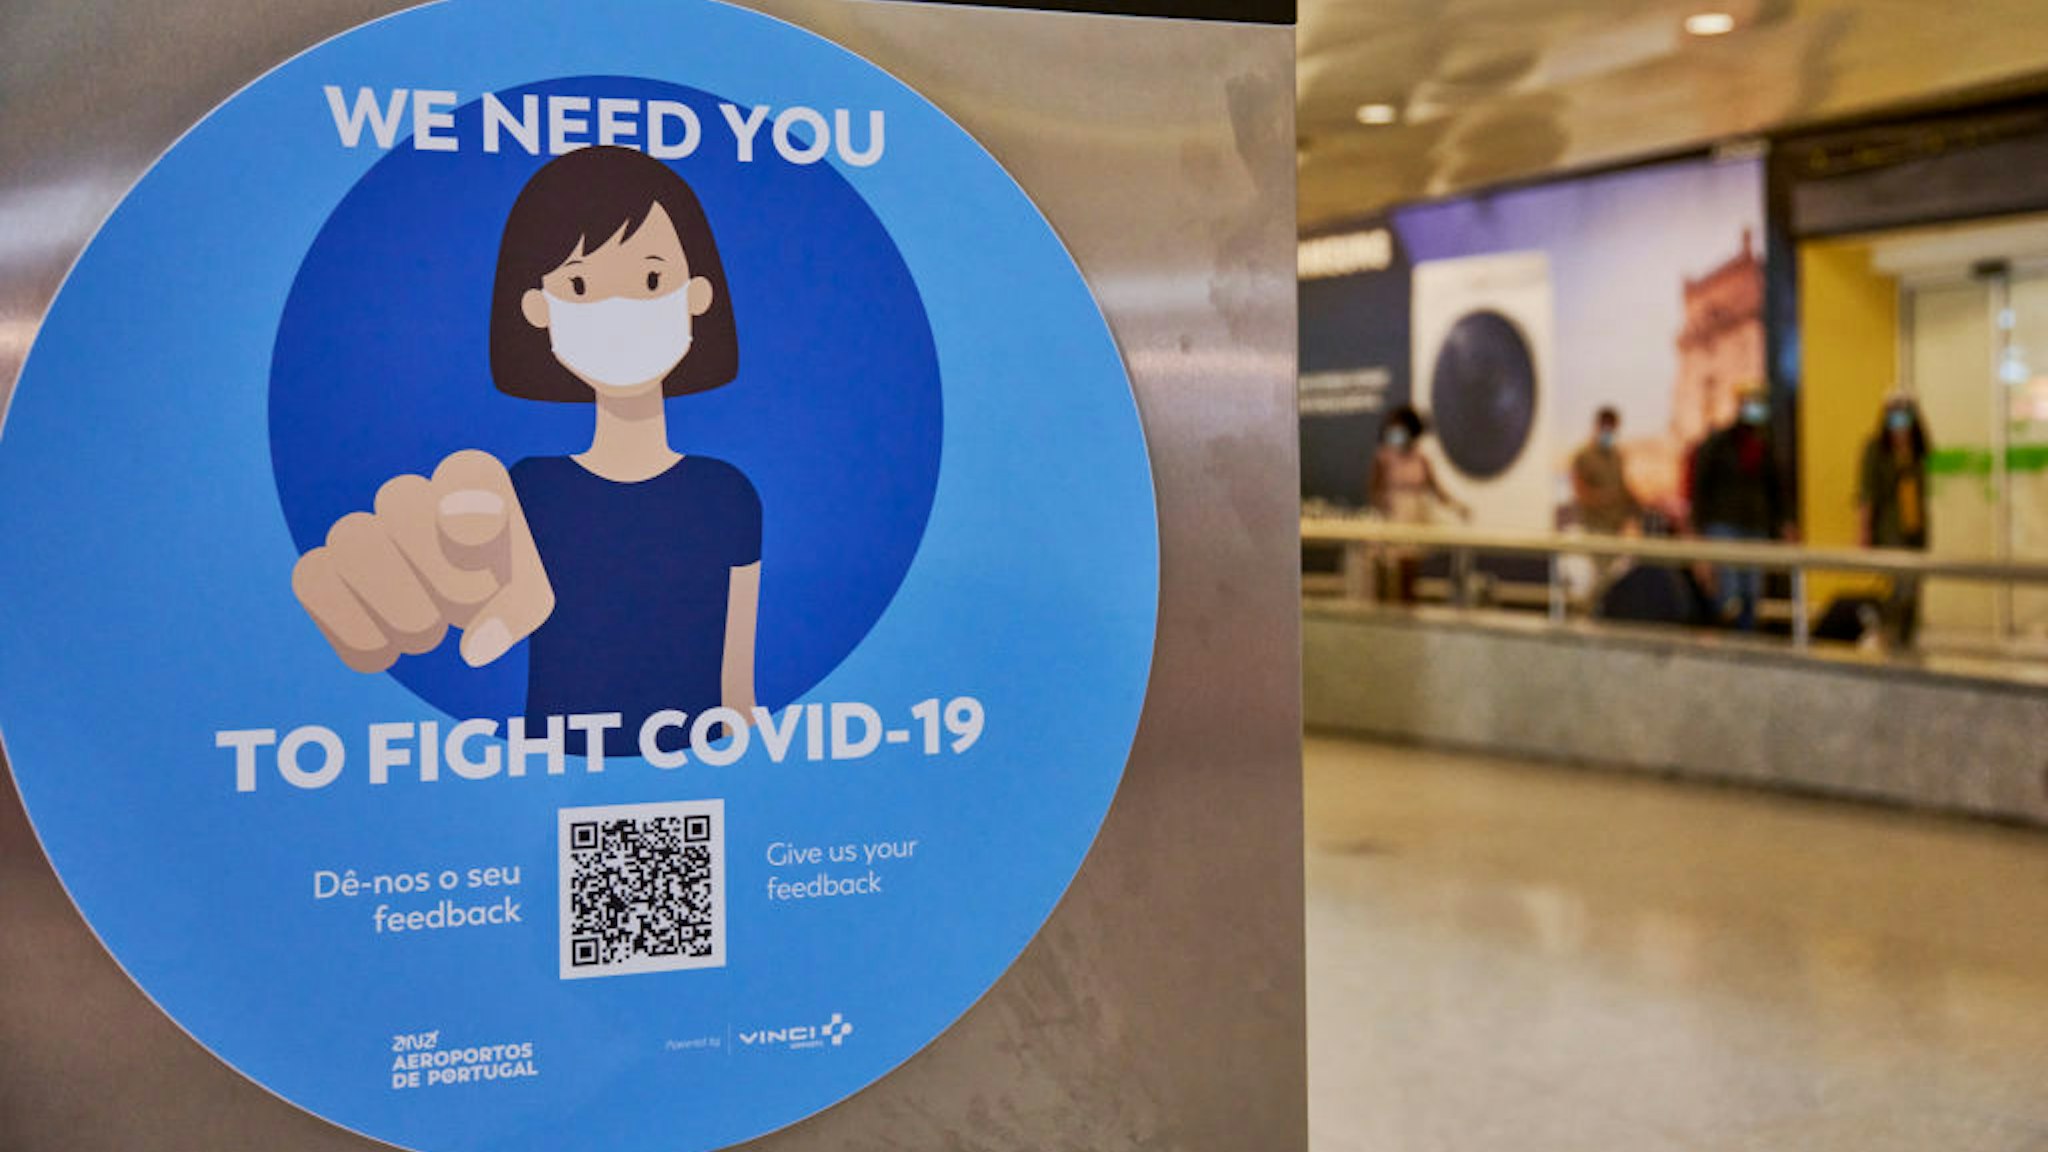 LISBON, PORTUGAL - JUNE 17: Mask-clad arriving travelers walk with their luggage behind a COVID-19 related advertising at the arrivals hall of Terminal 1 in Humberto Delgado International Airport a day after the country started issuing the first Immune certificates, as part of the European Union's COVID-19 Digital Certificate, during COVID-19 Coronavirus pandemic on June 17, 2021 in Lisbon, Portugal. Traveling becomes safer and easier for Portuguese residents as the vaccination certificates will be made available for all users of the country's National Health Service, and the DGS indicated that it will issue three different certificates, namely, the vaccination certificate, the test certificate, and the recovery certificate. (Photo by Horacio Villalobos#Corbis/Corbis via Getty Images)